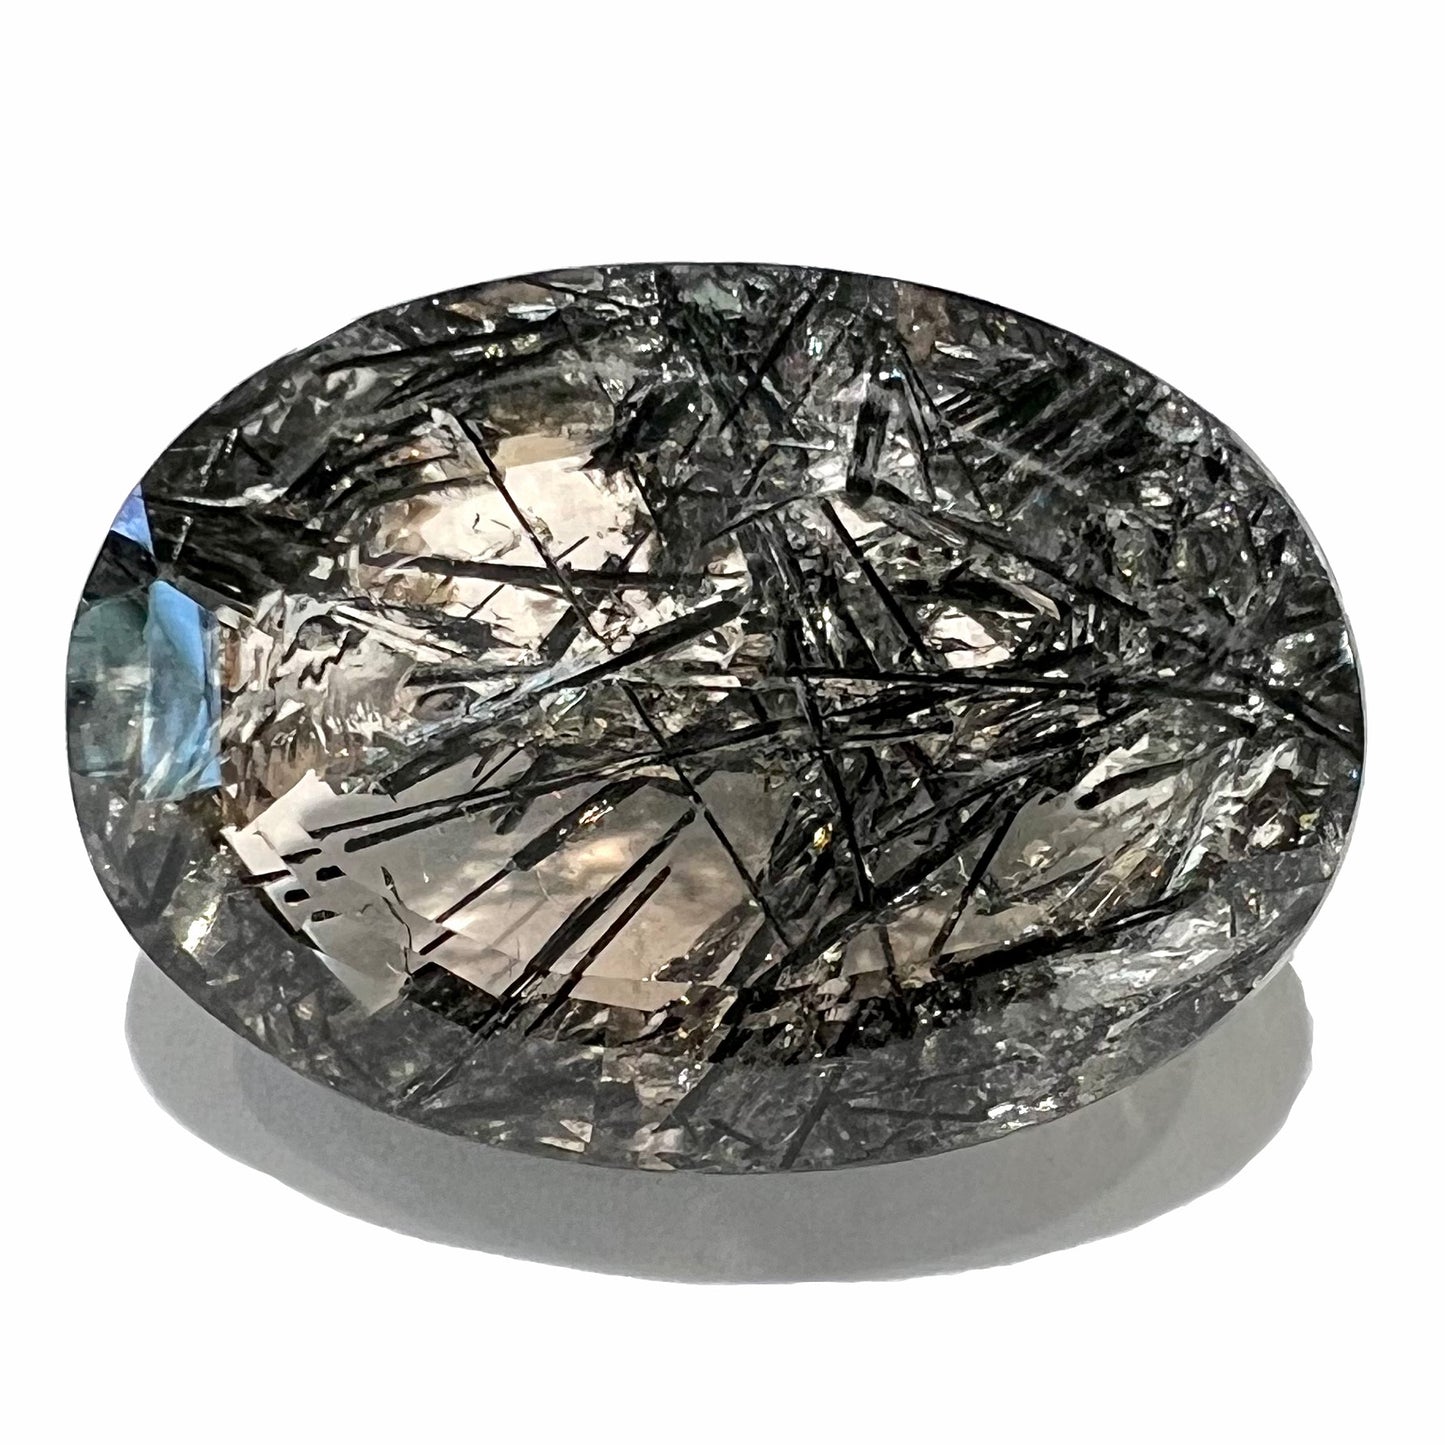 A loose, faceted oval cut smoky quartz stone with black tourmaline crystal inclusions.  The gem weighs 35.68 carats.